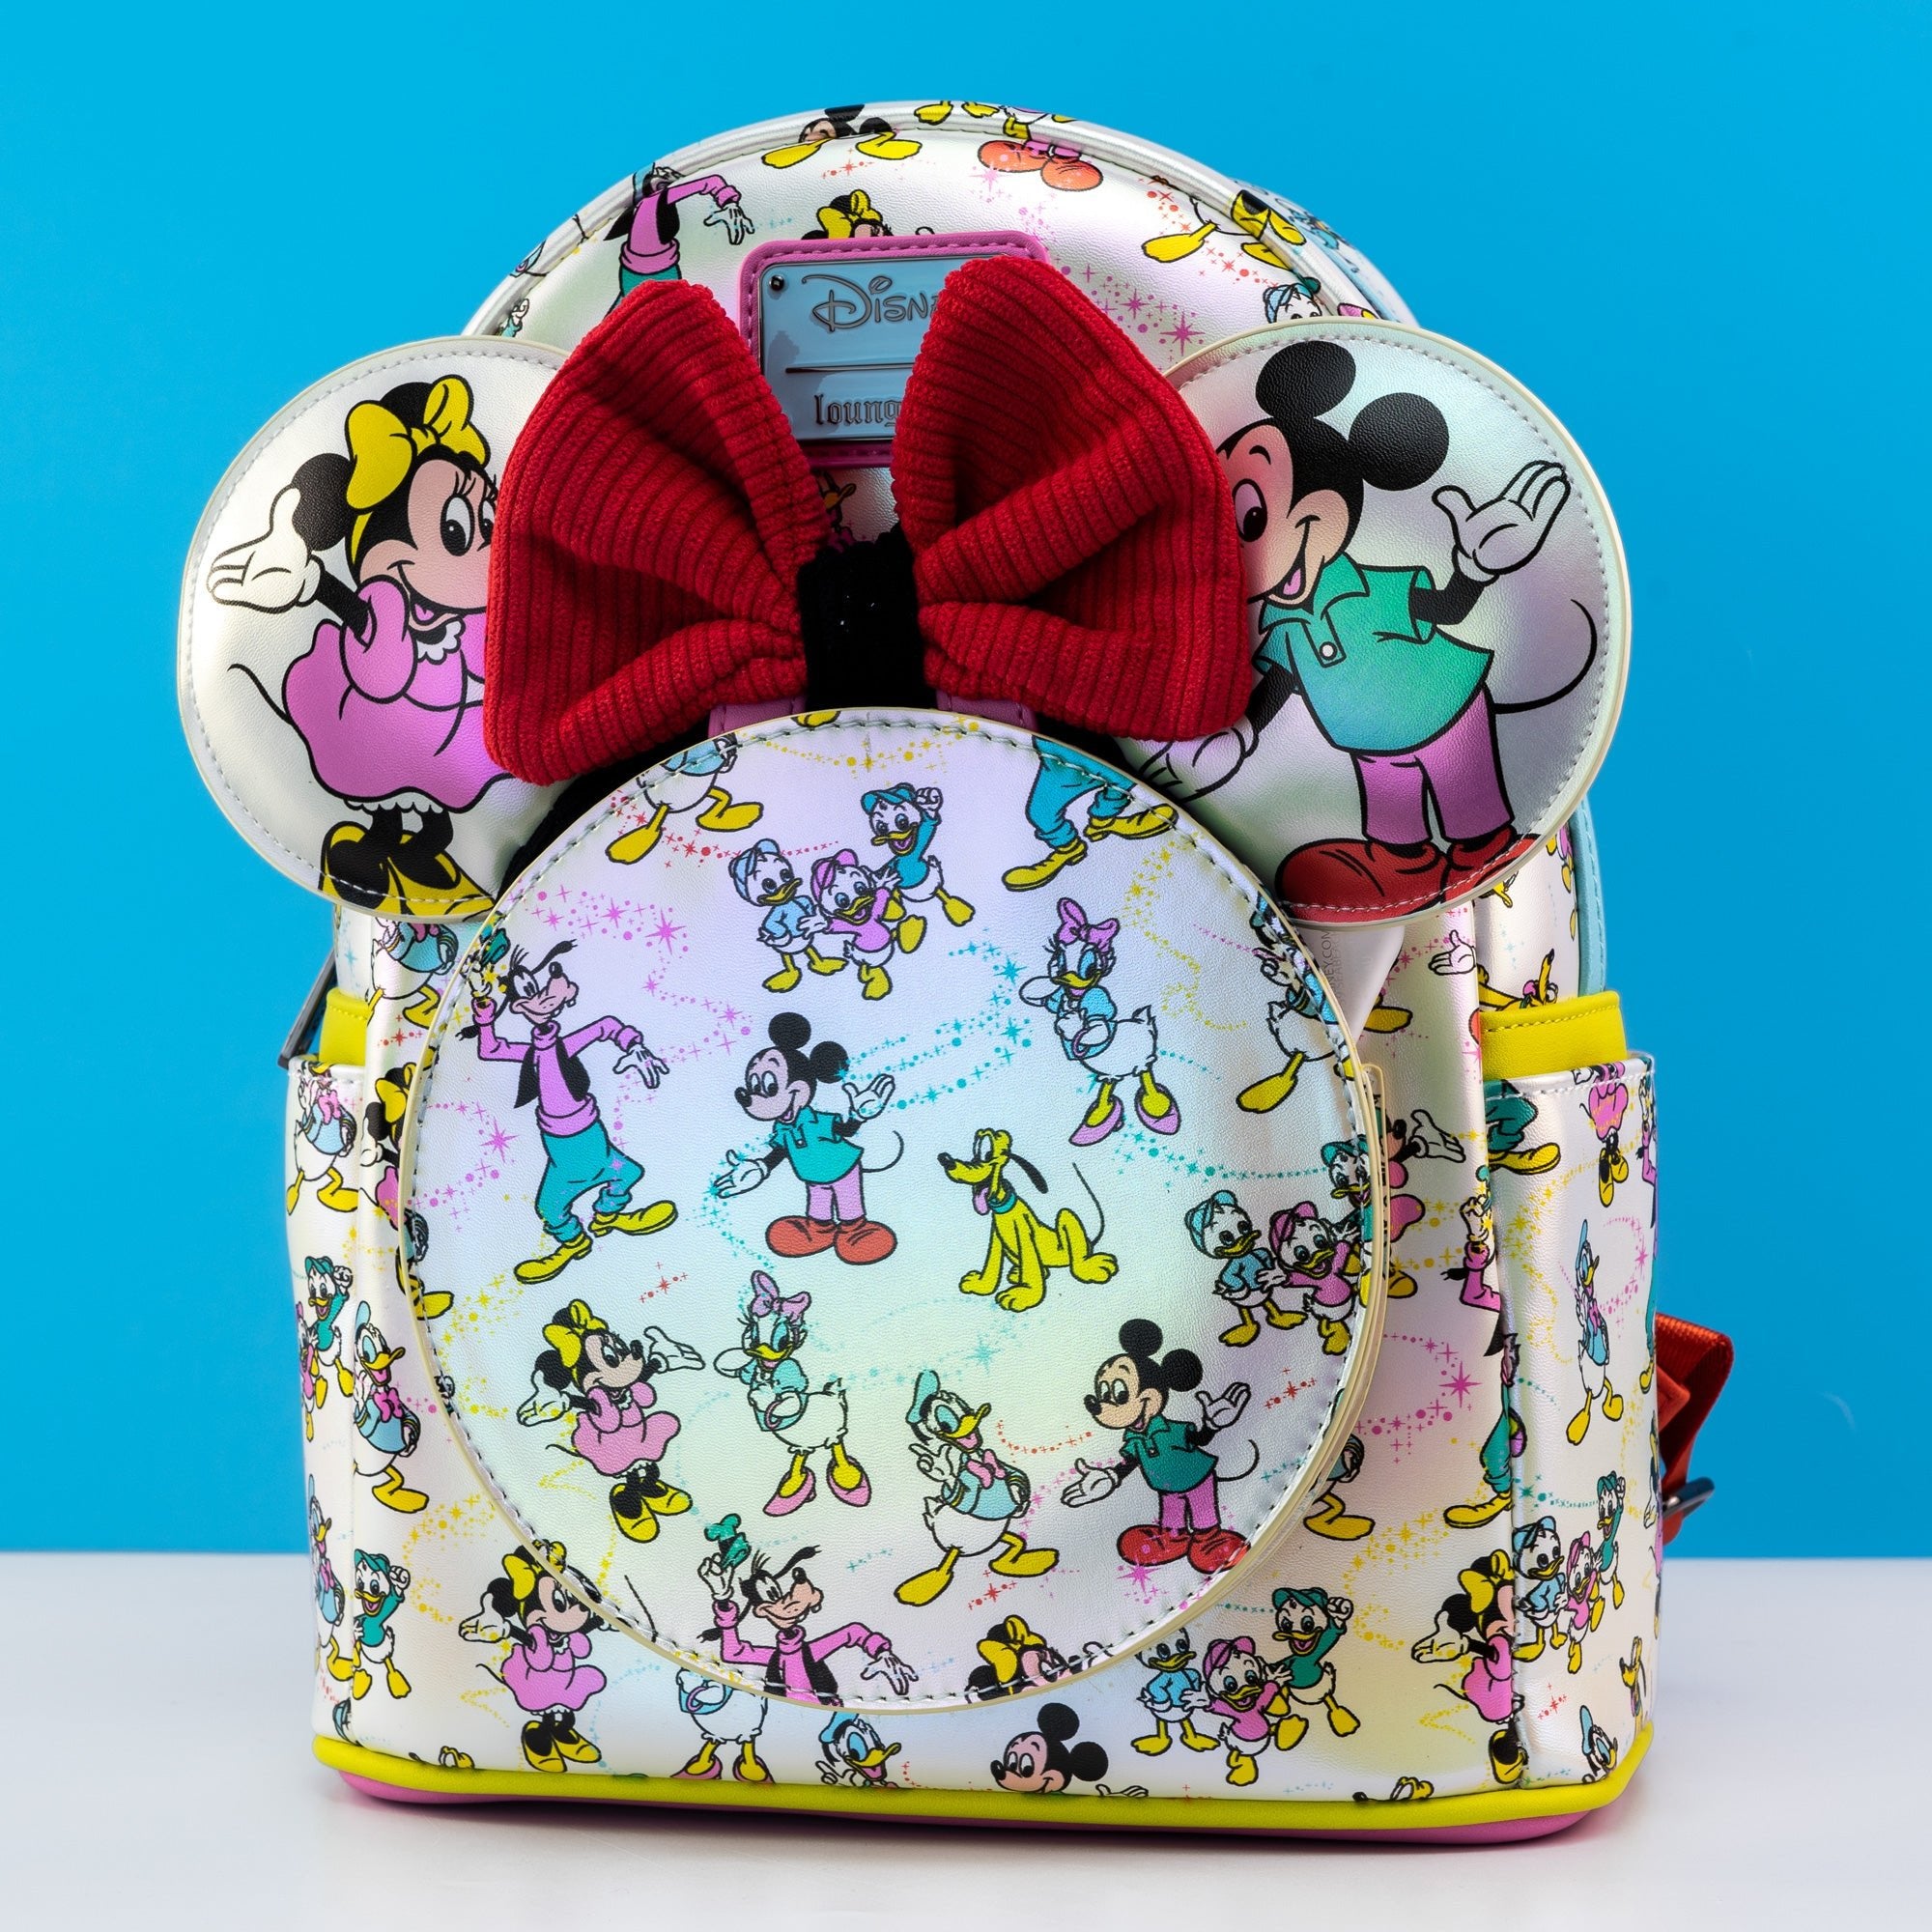 Loungefly x Disney - Disney 100 AOP Mini Backpack and Matching Ears - GeekCore